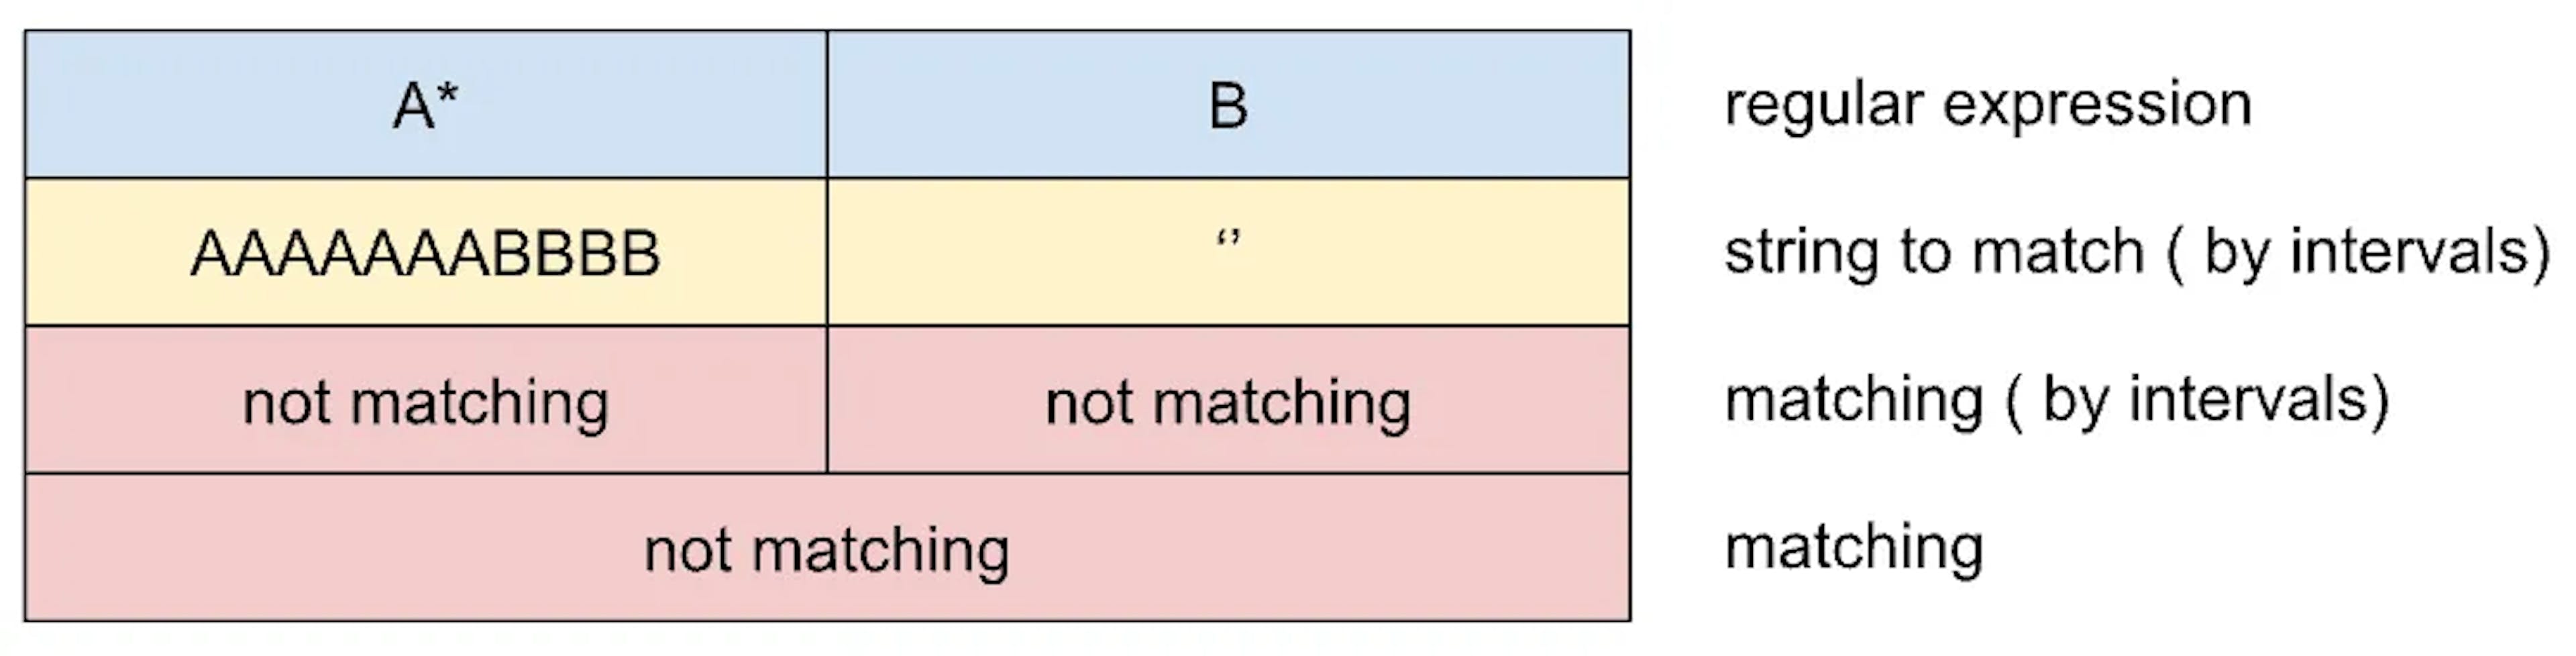 Picture 4: Initial dividing of the string by intervals for placeholders